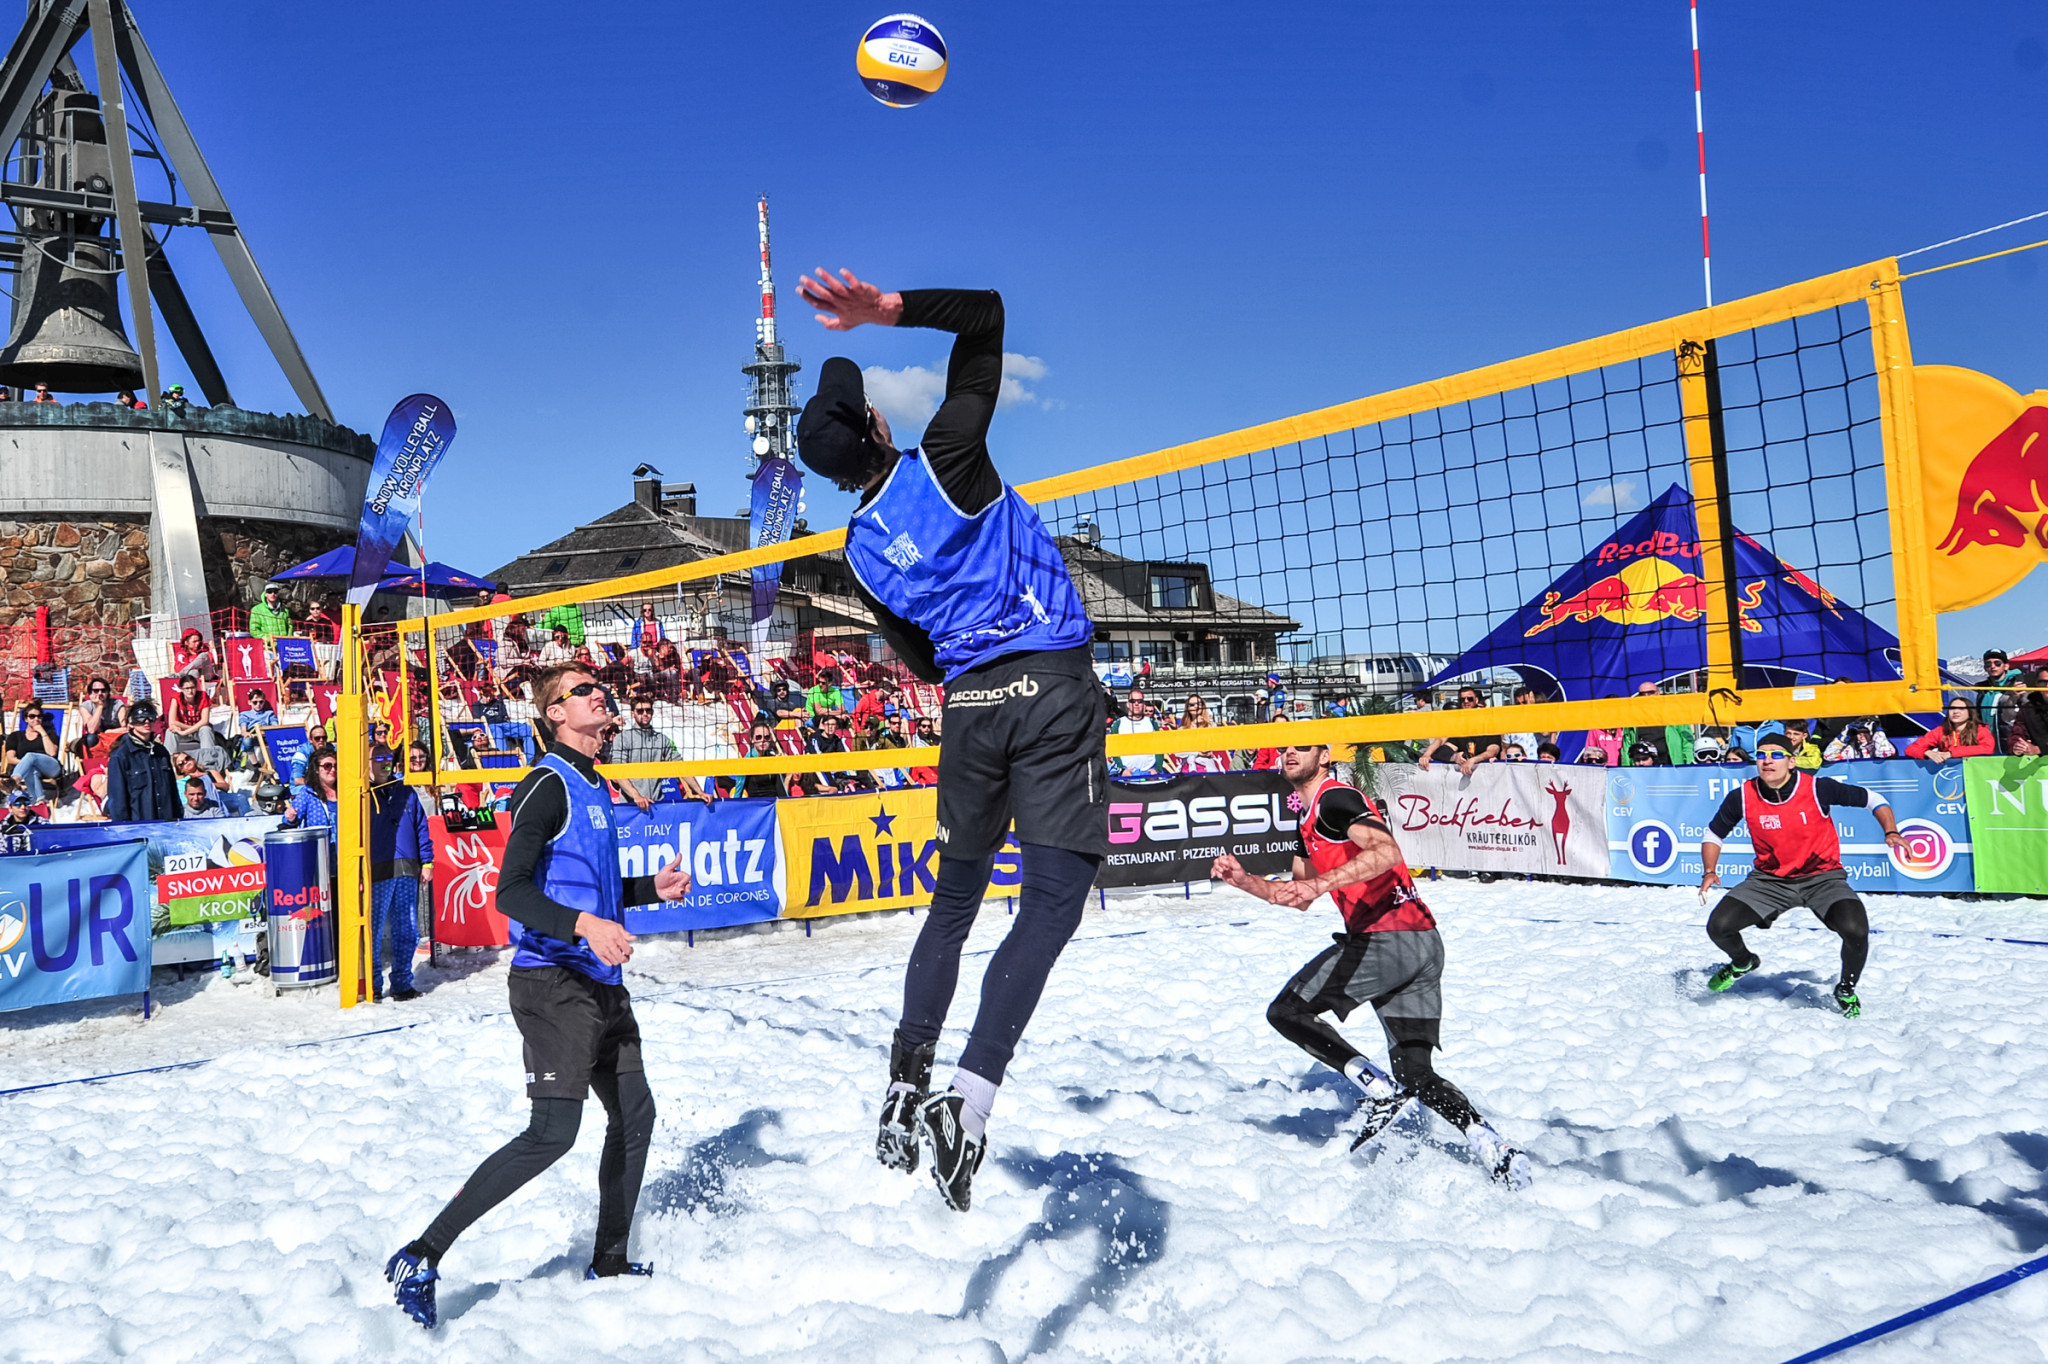 Snow volleyball could feature as a medal event at Turin 2025 ©FIVB